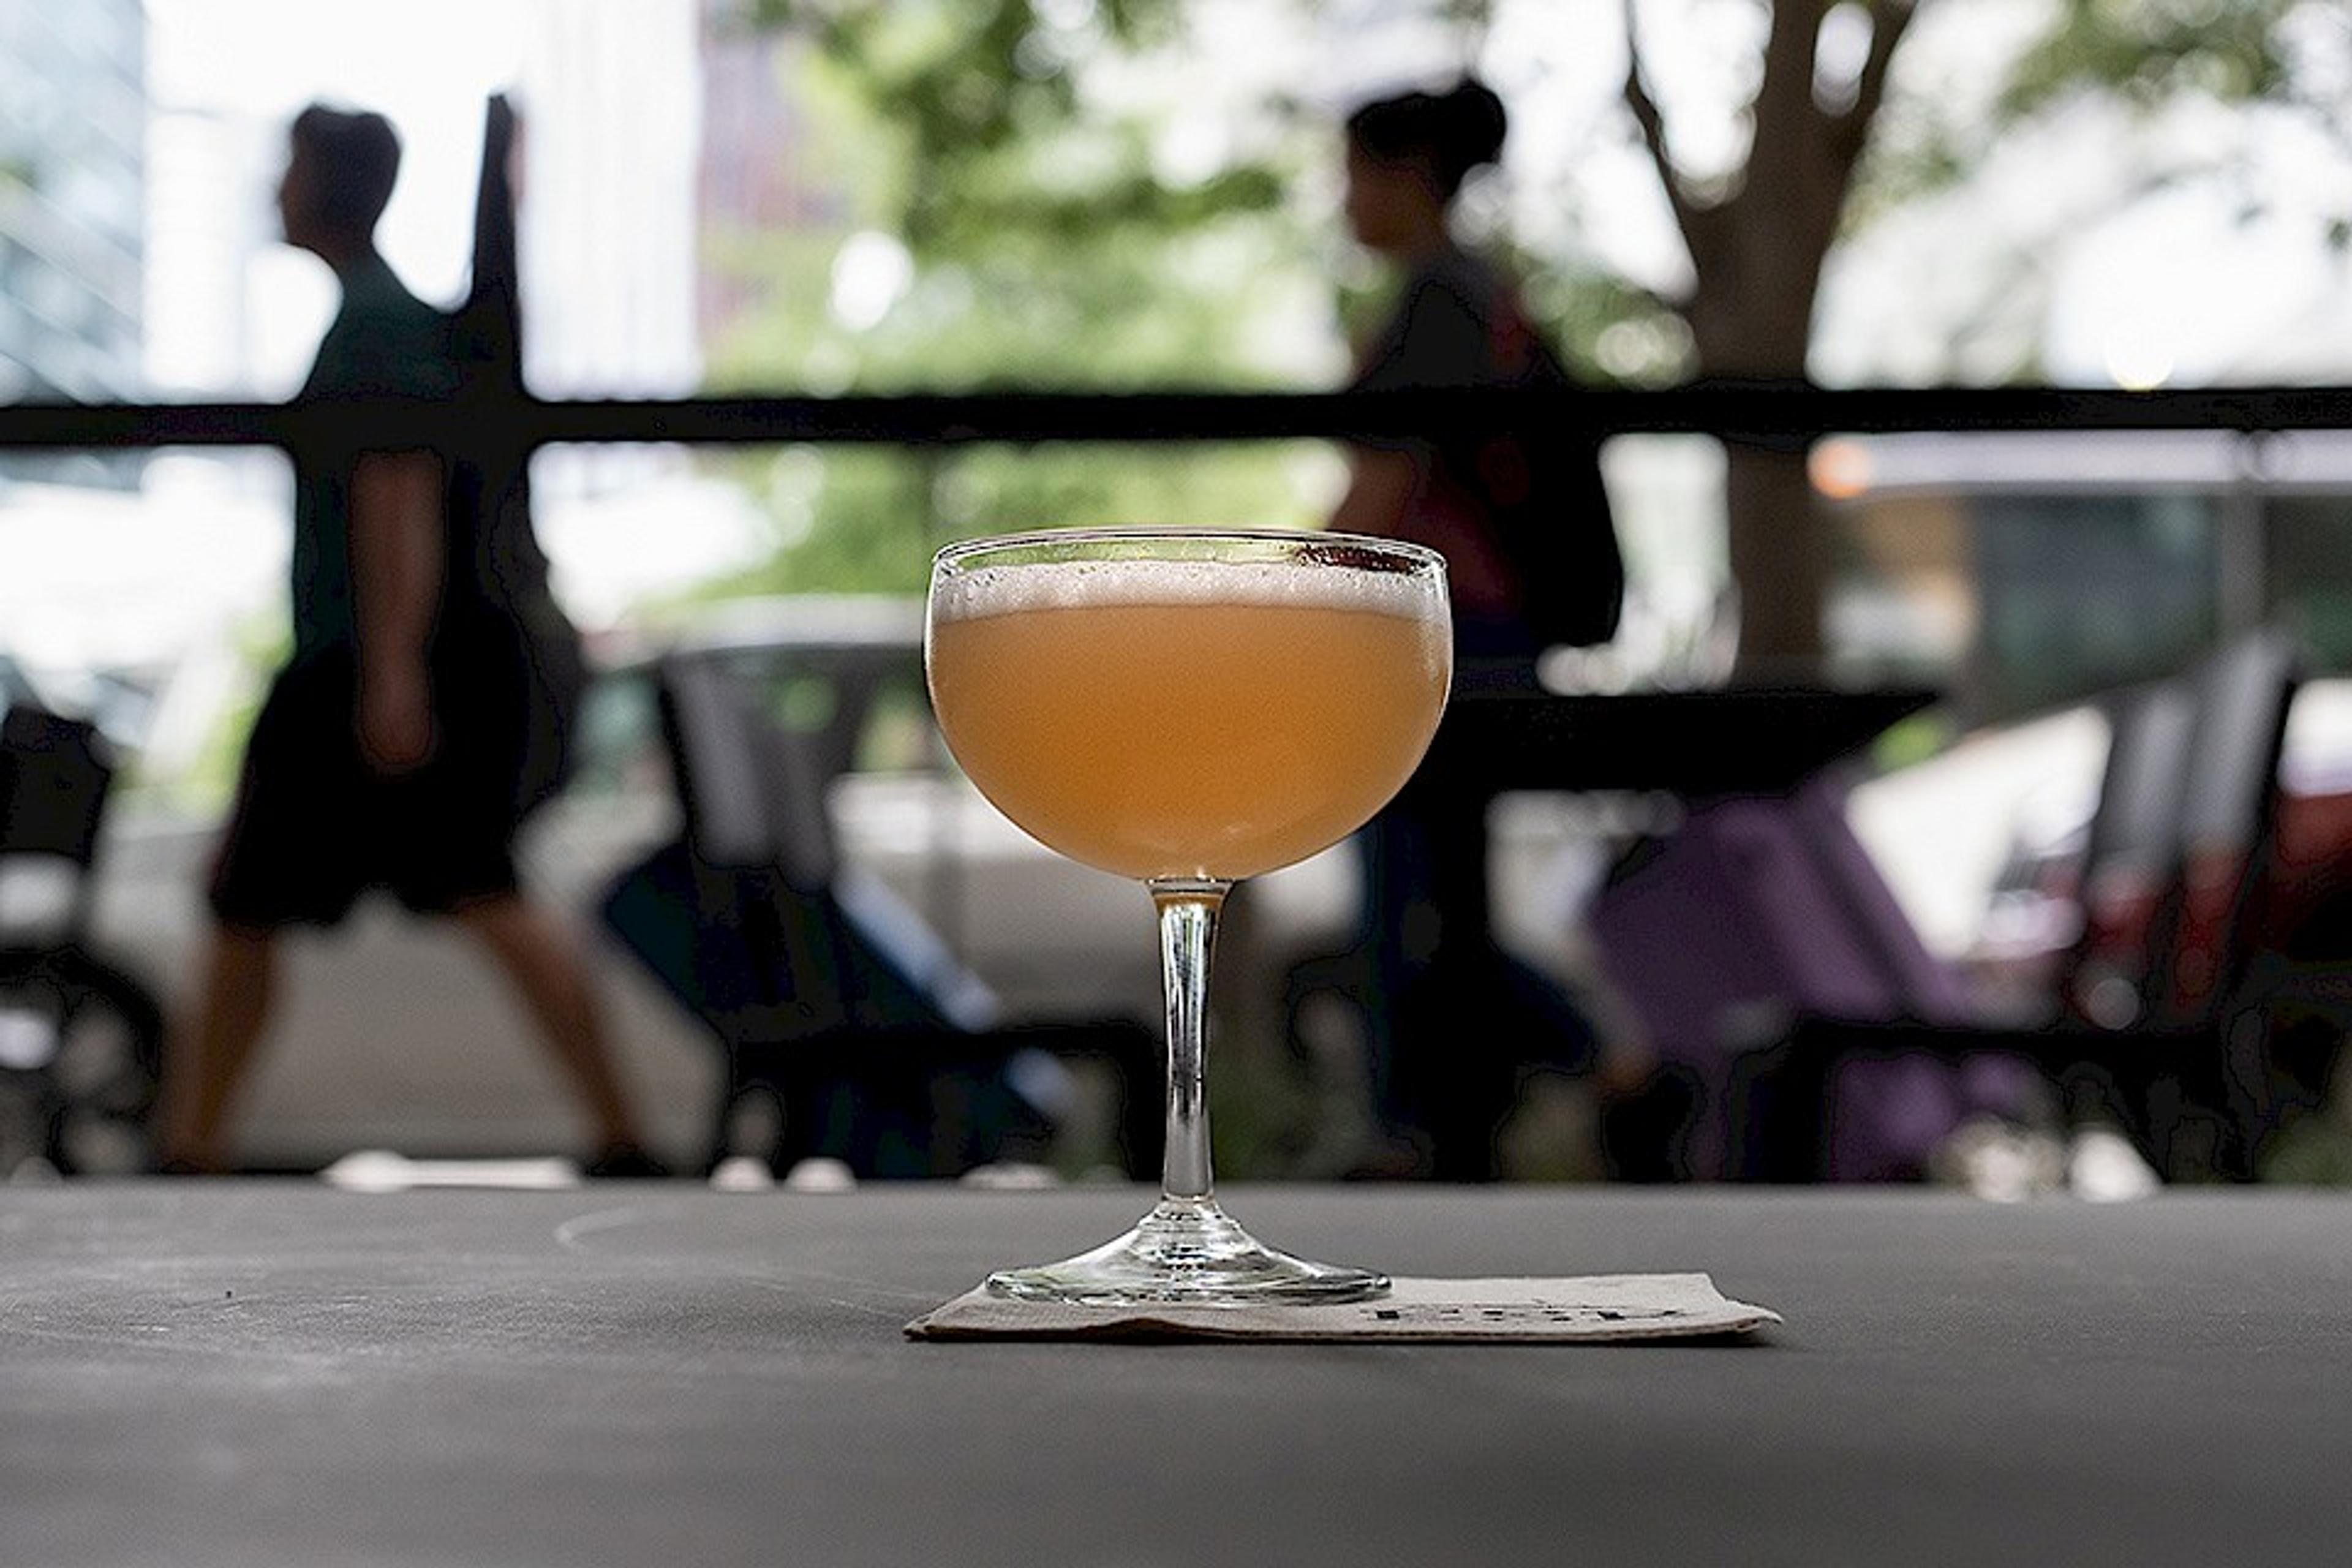 cocktail on patio with pedestrians and the Amazon Spheres in the background